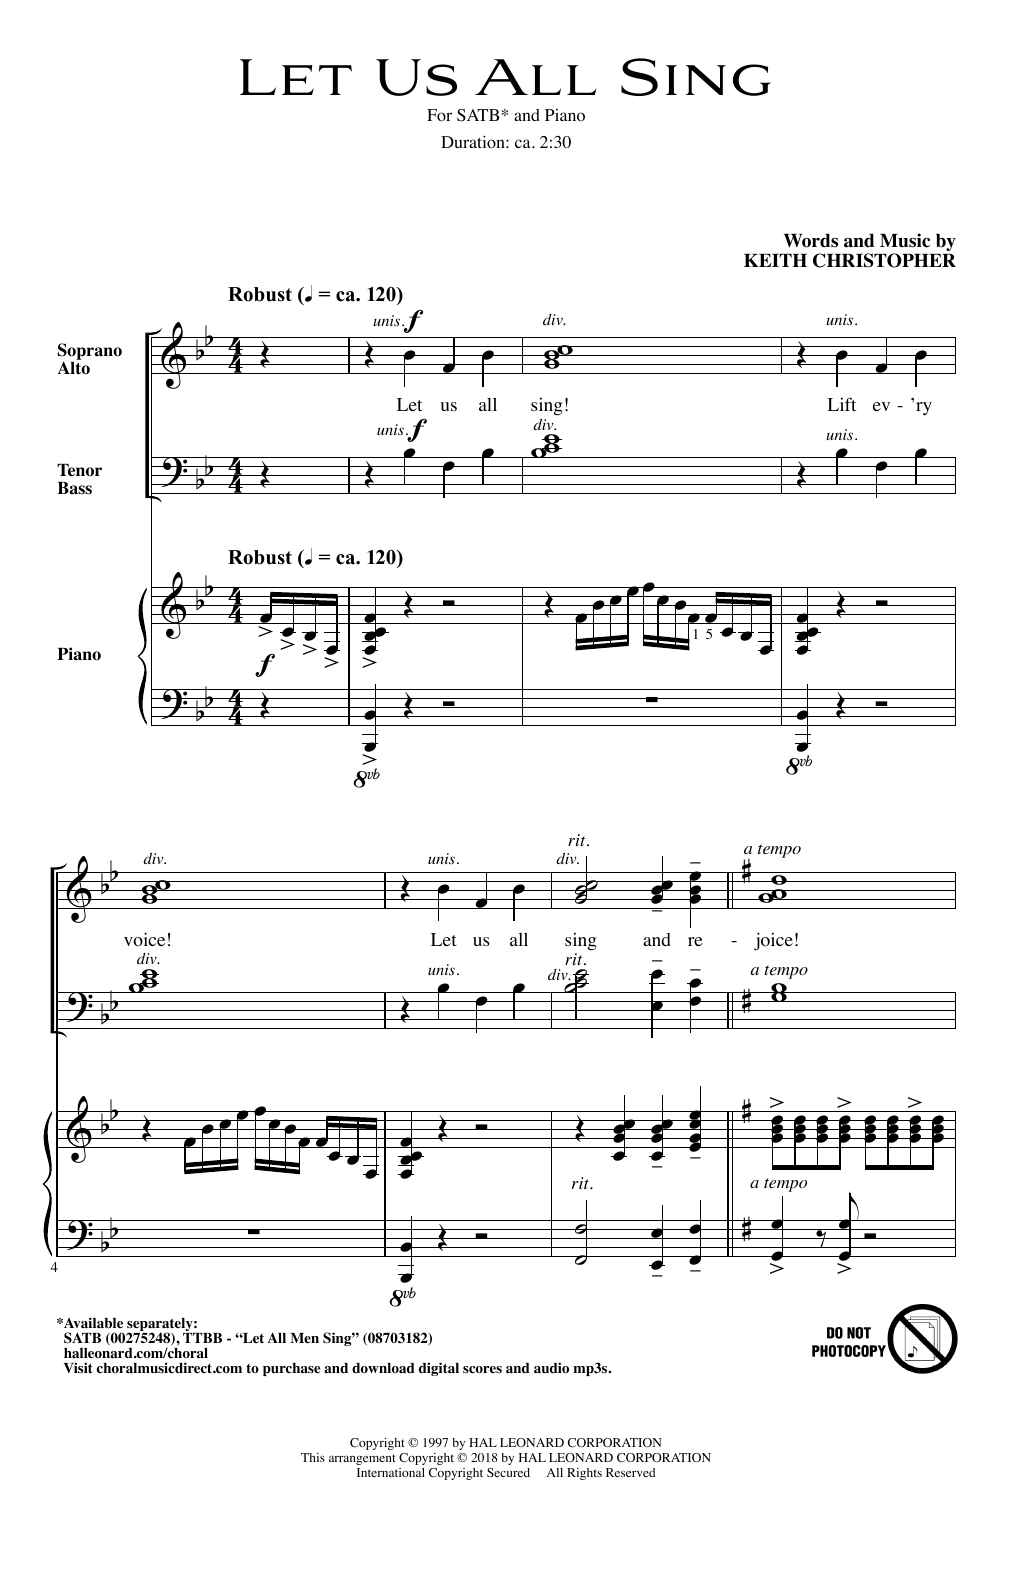 Download Keith Christopher Let Us All Sing Sheet Music